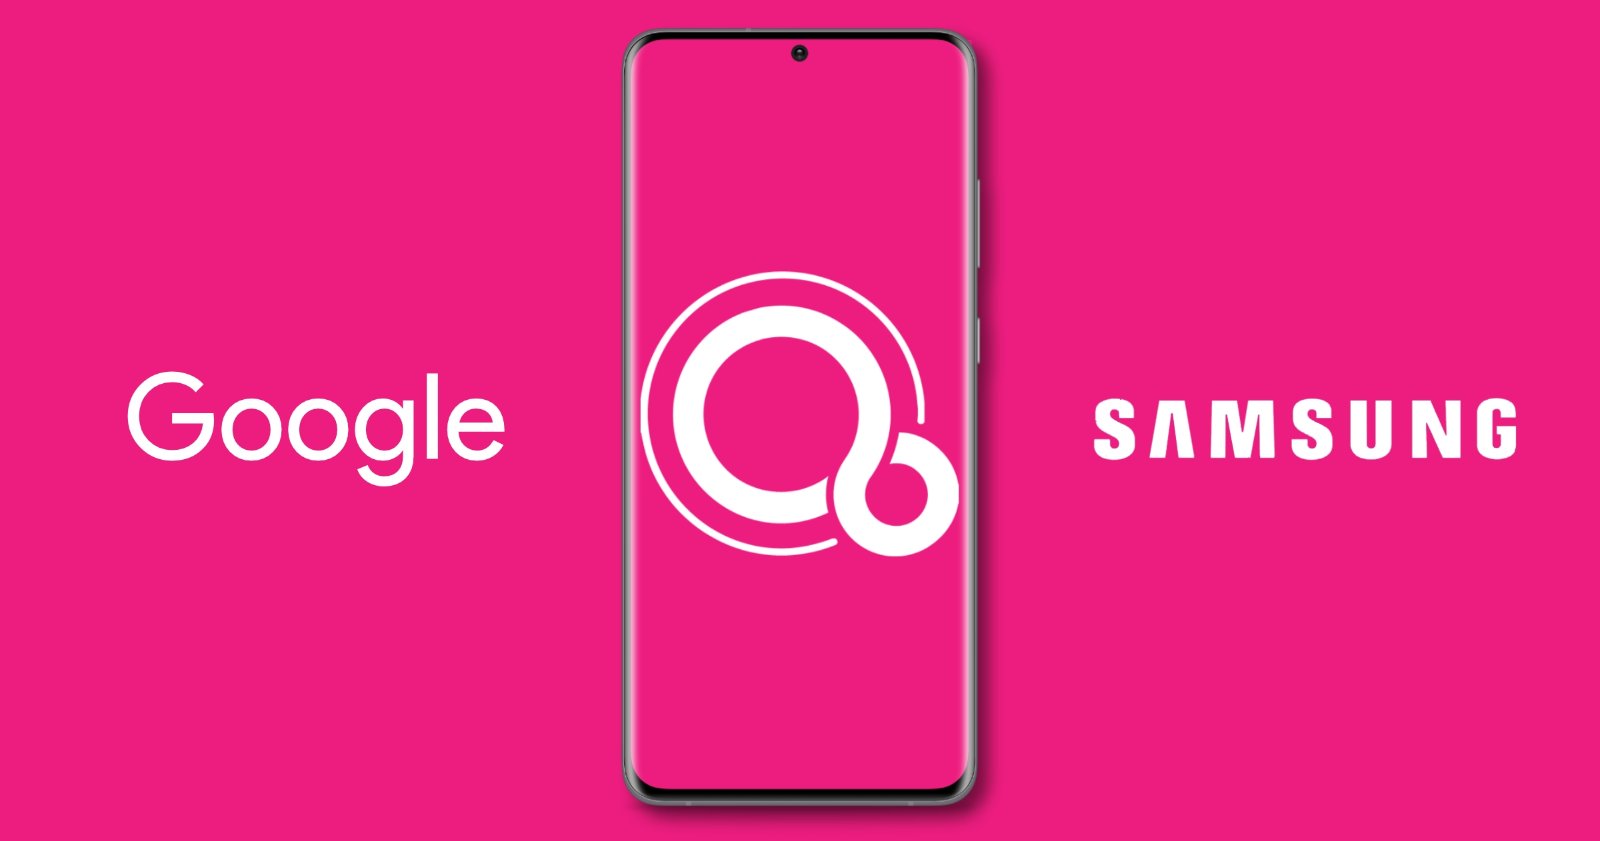 Fuchsia OS Samsung looking to replace Android with Google’s